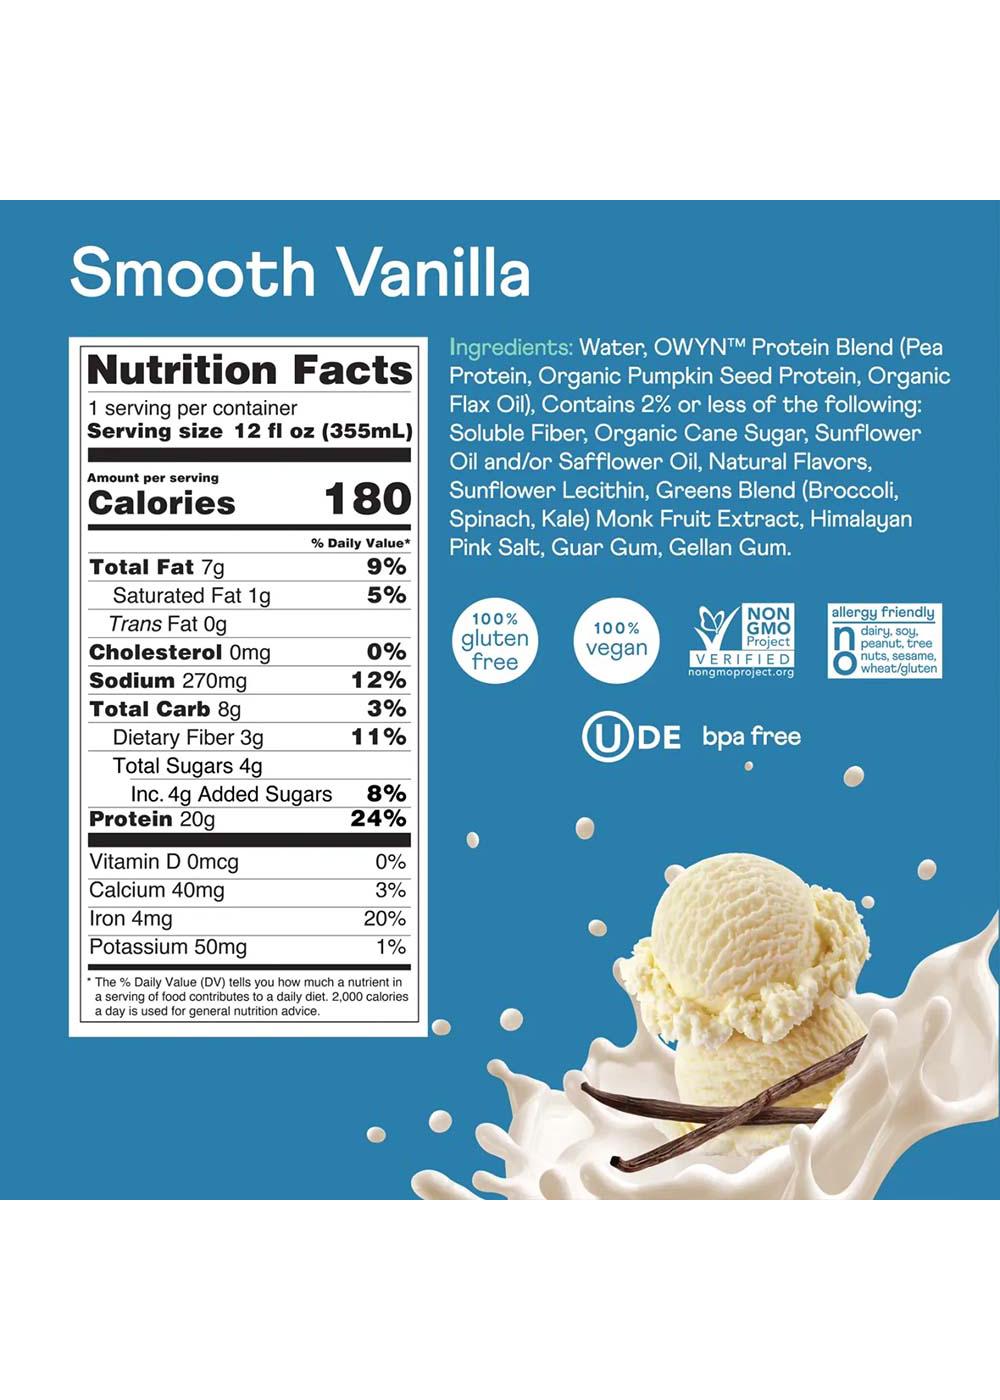 OWYN Smooth Vanilla Protein Drink; image 2 of 2